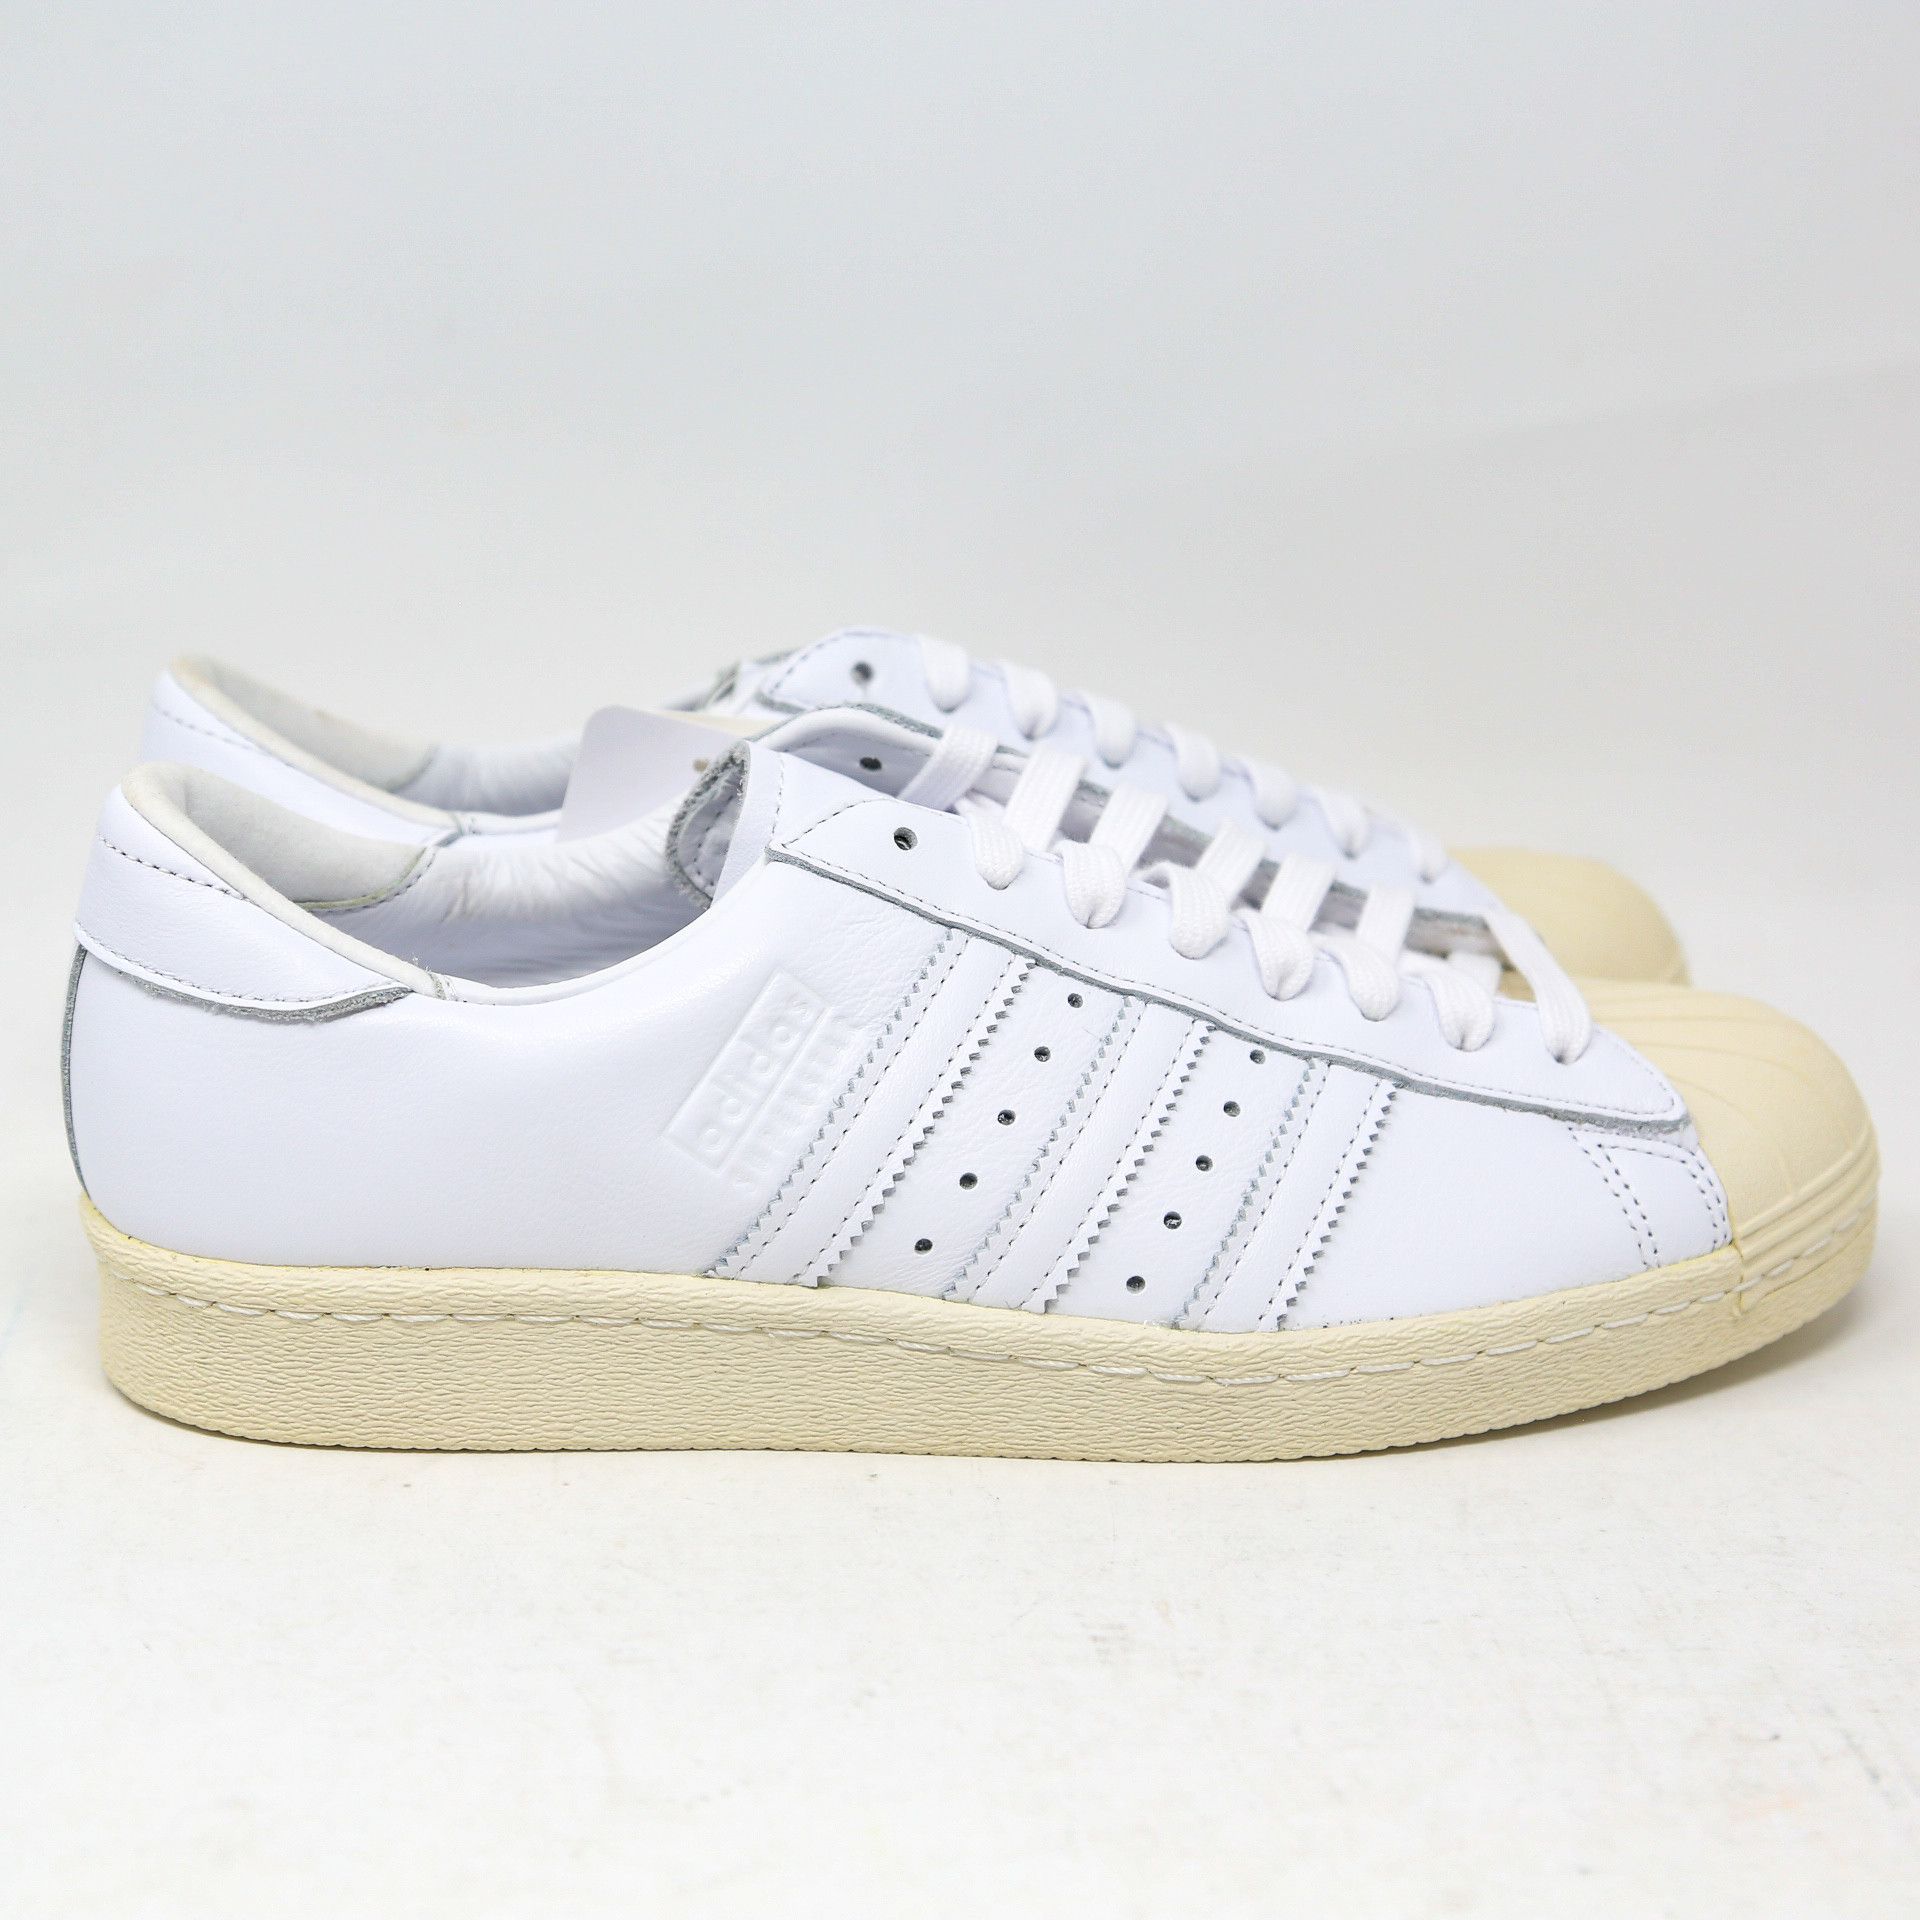 Adidas Superstar 80s Recon Off-White EE7392 Retro size 11 Size US 11 / EU 44 - 2 Preview